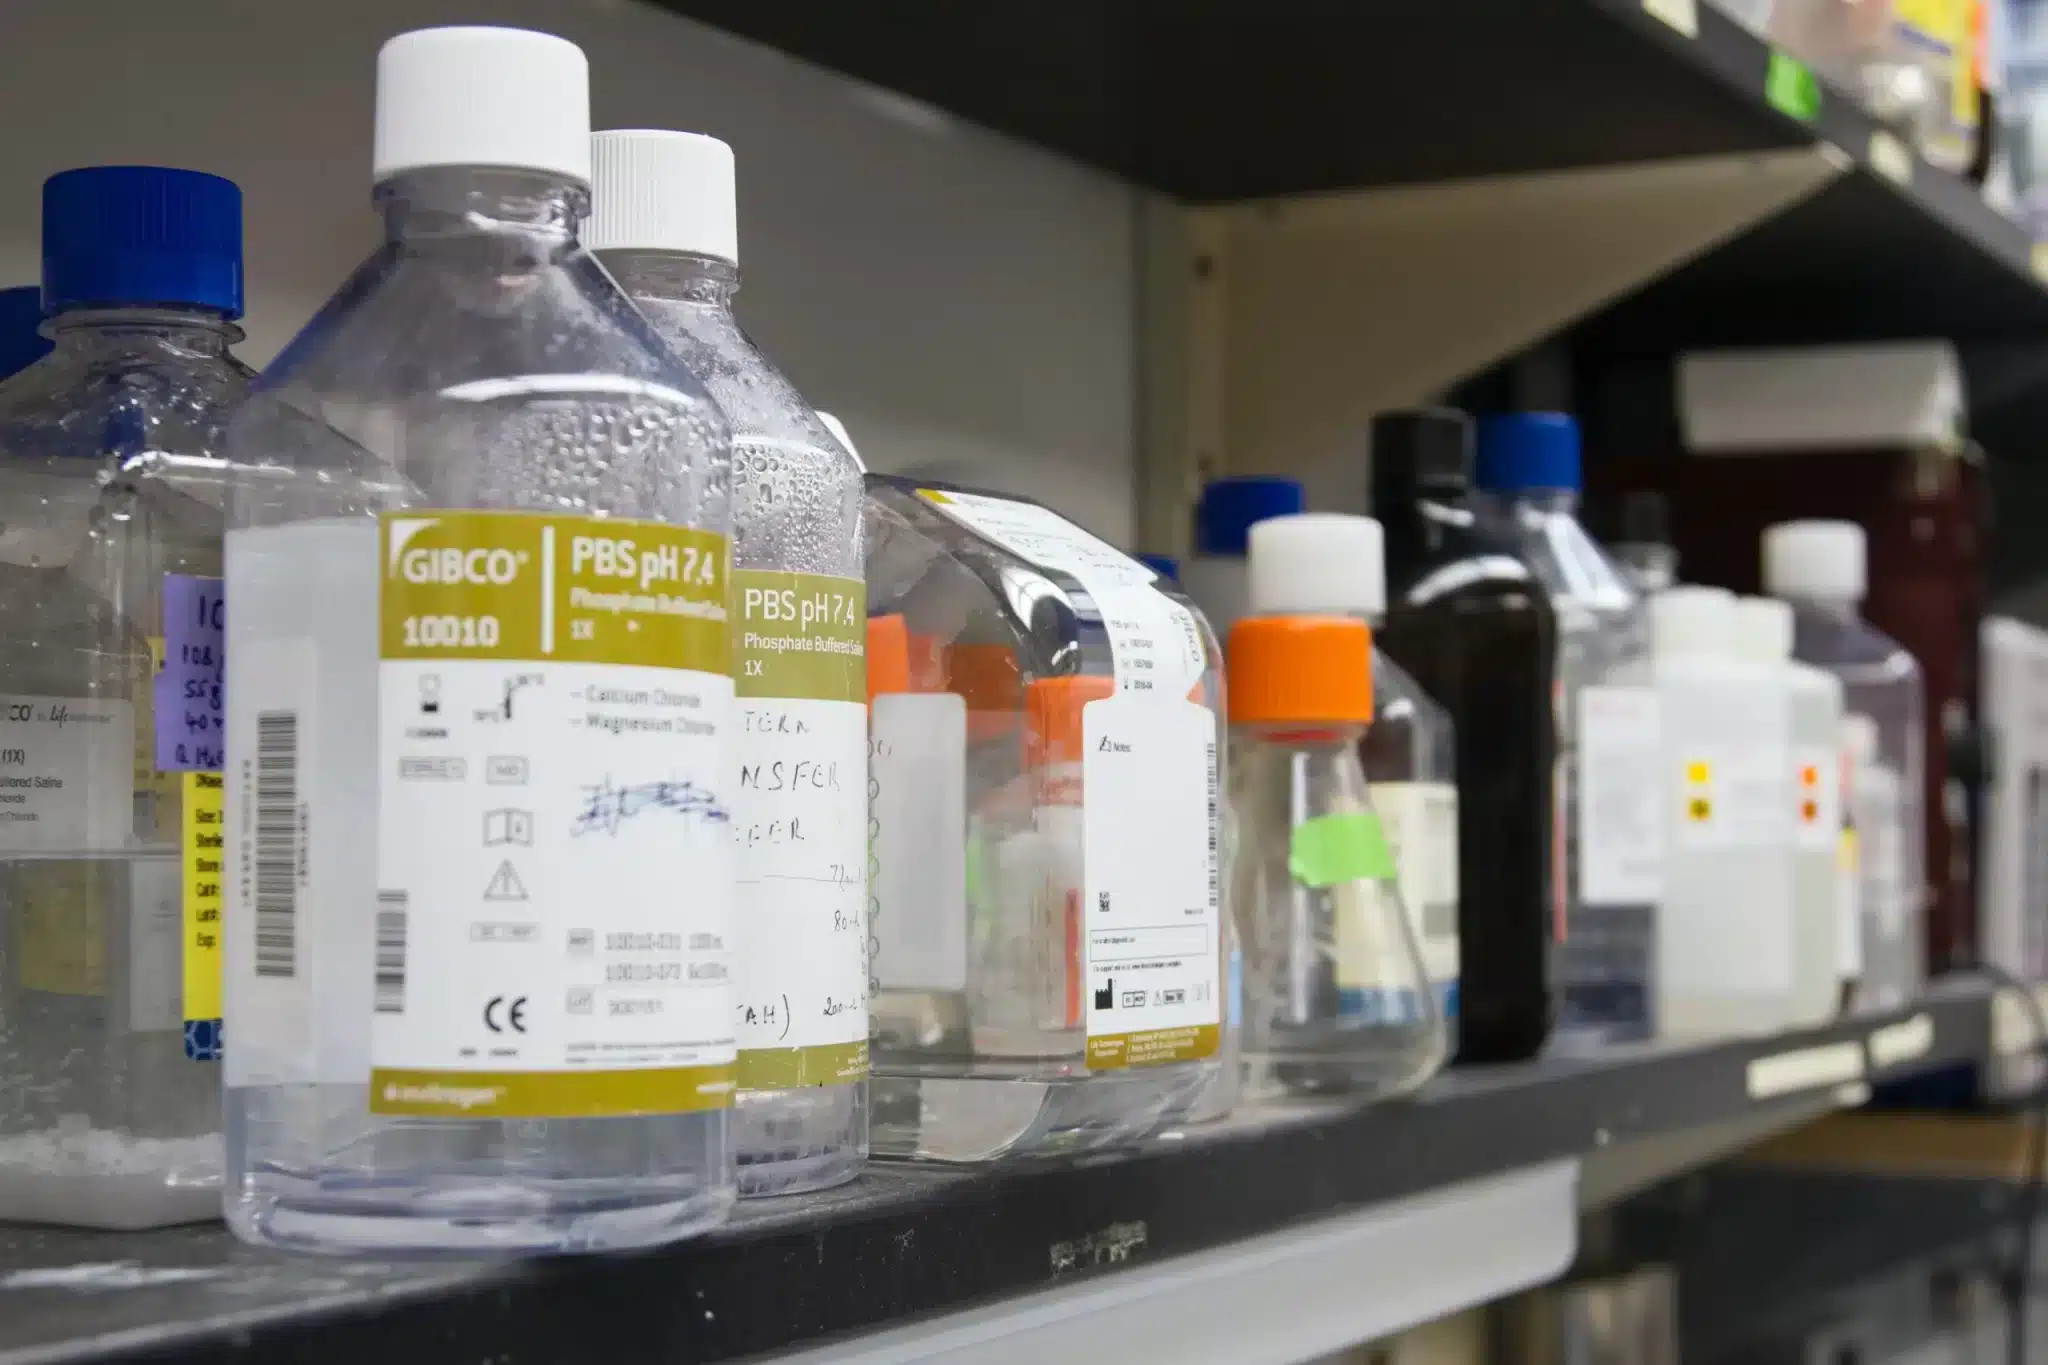 A laboratory shelf stocked with a variety of chemical reagent bottles, some clear and some amber-colored, each labeled with scientific notations. The bottles contain different solutions, including a prominently displayed phosphate-buffered saline (PBS) with a pH of 7.4.